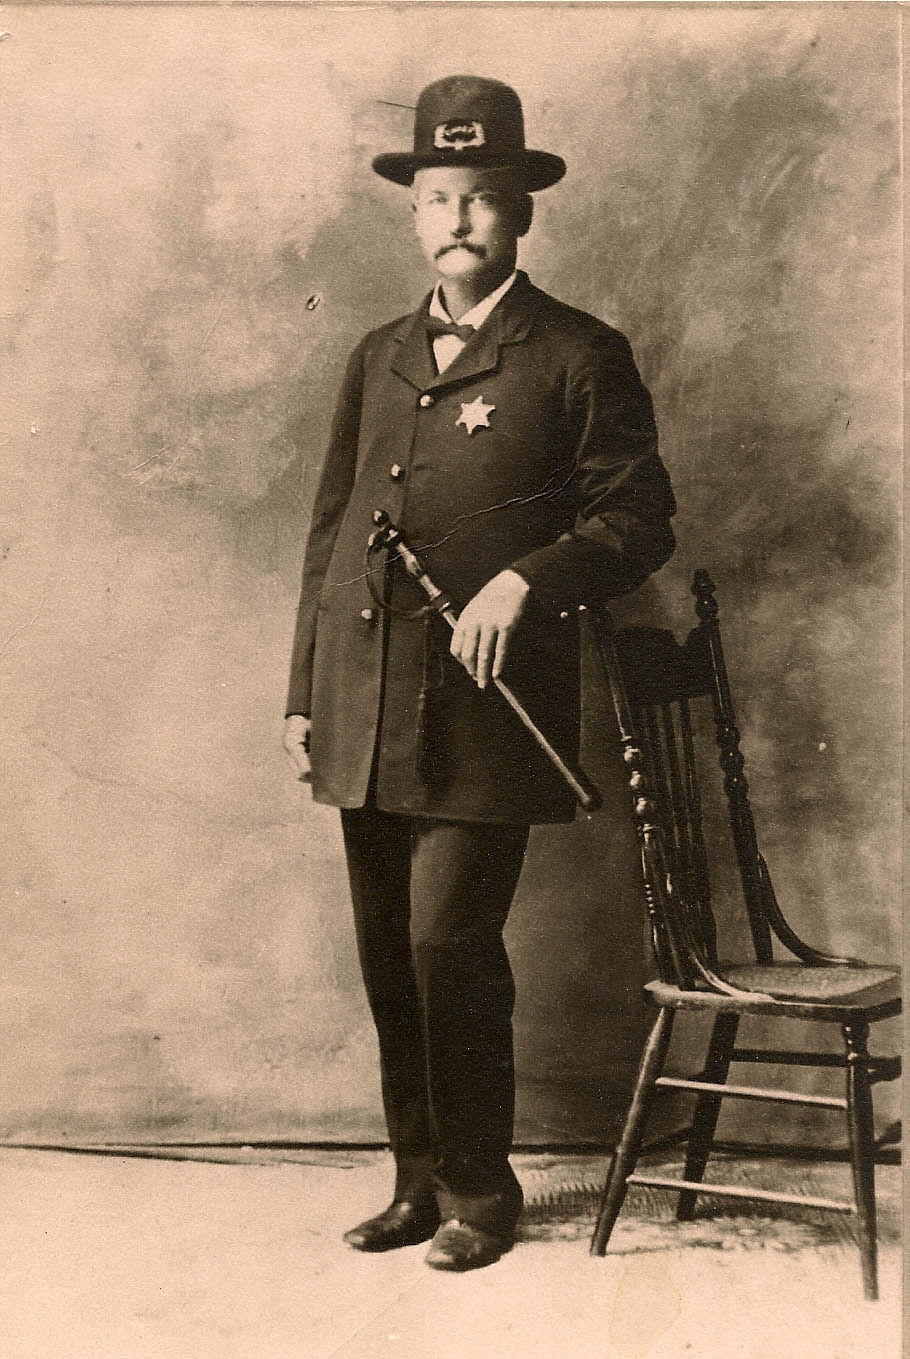 Charles Sylvester Bunyan, US Marshall-Oklahoma Territory (date unknown)